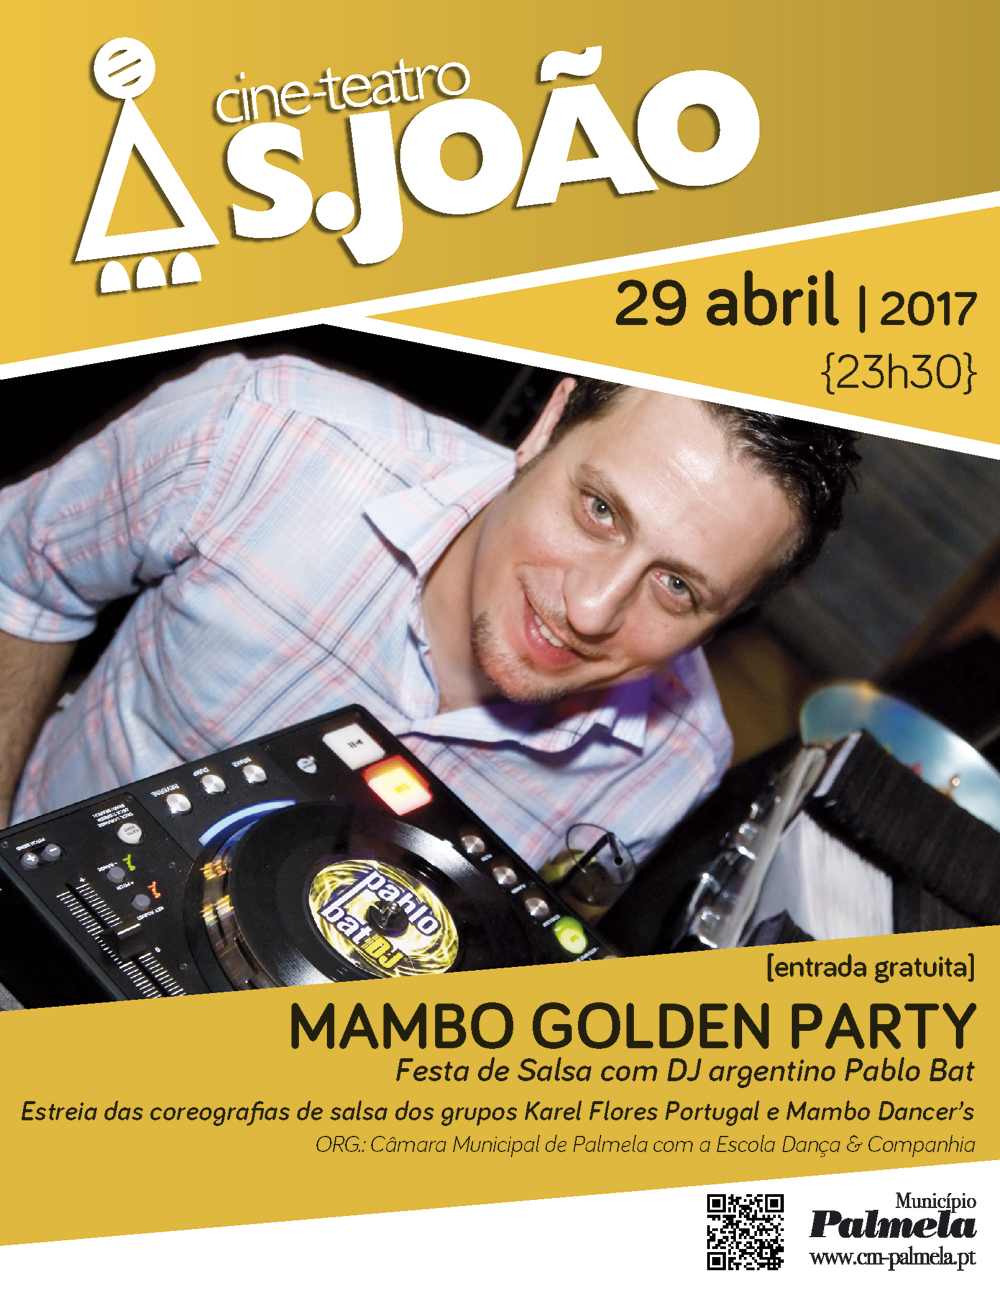 MAMBO GOLDEN PARTY